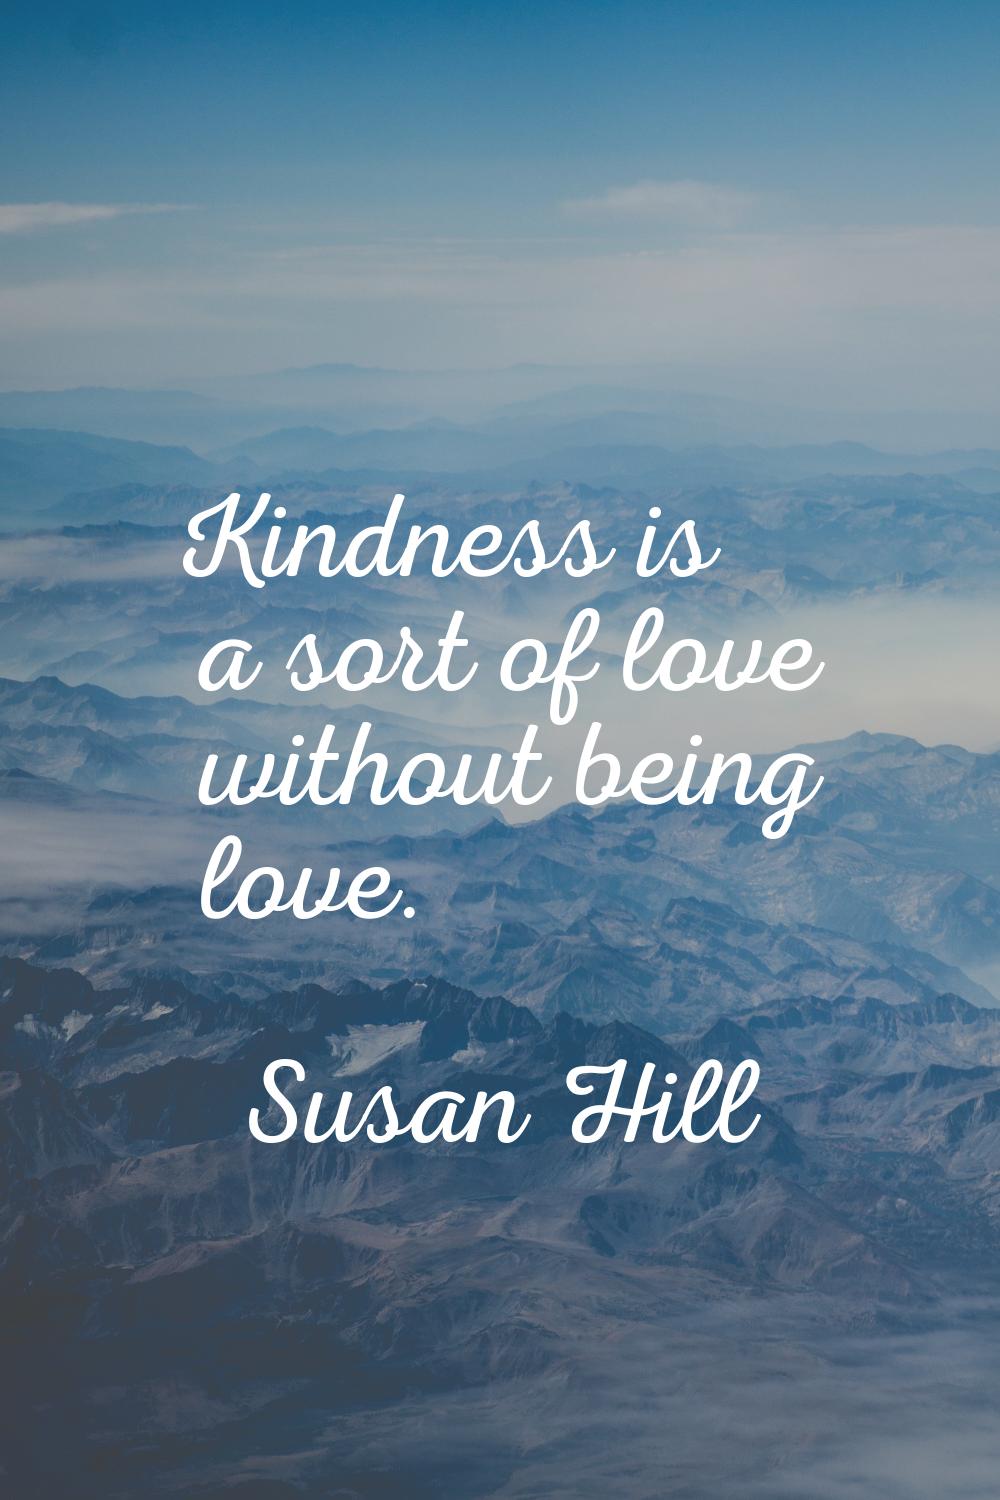 Kindness is a sort of love without being love.